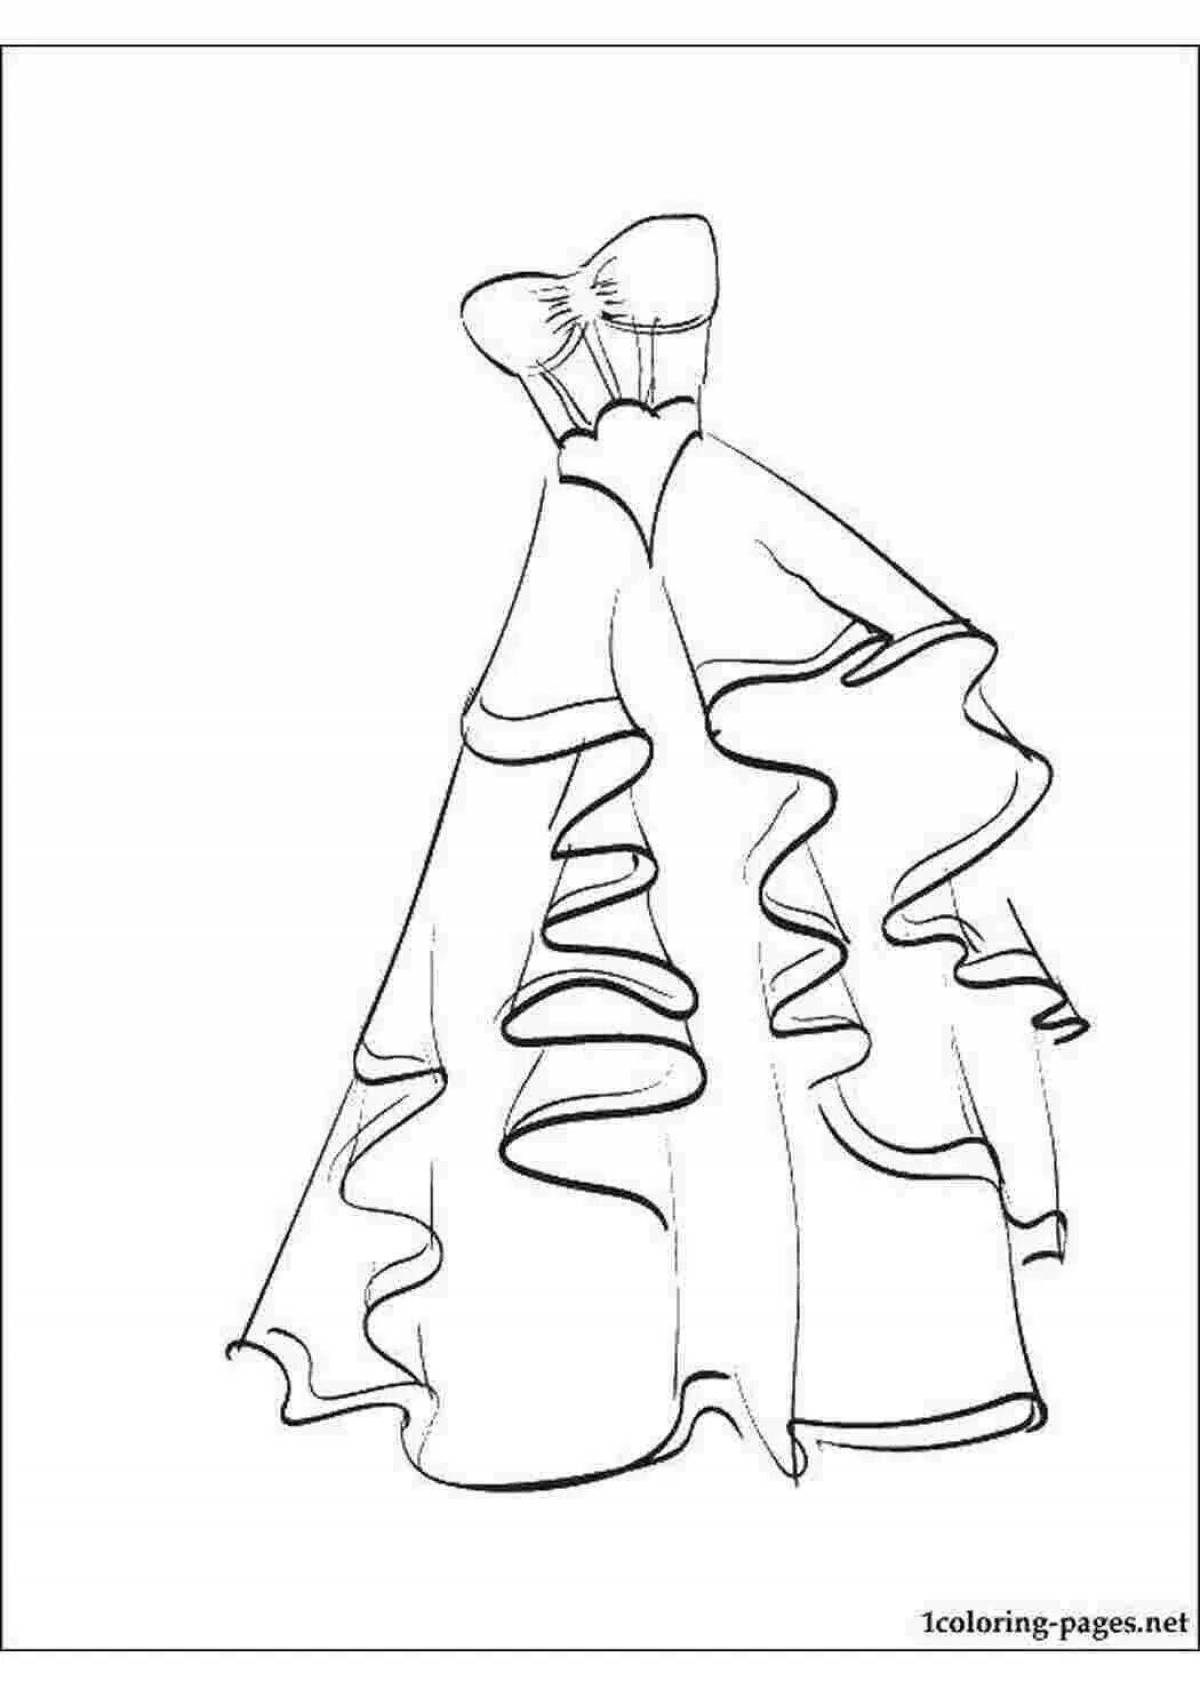 Ball gown radiant coloring page